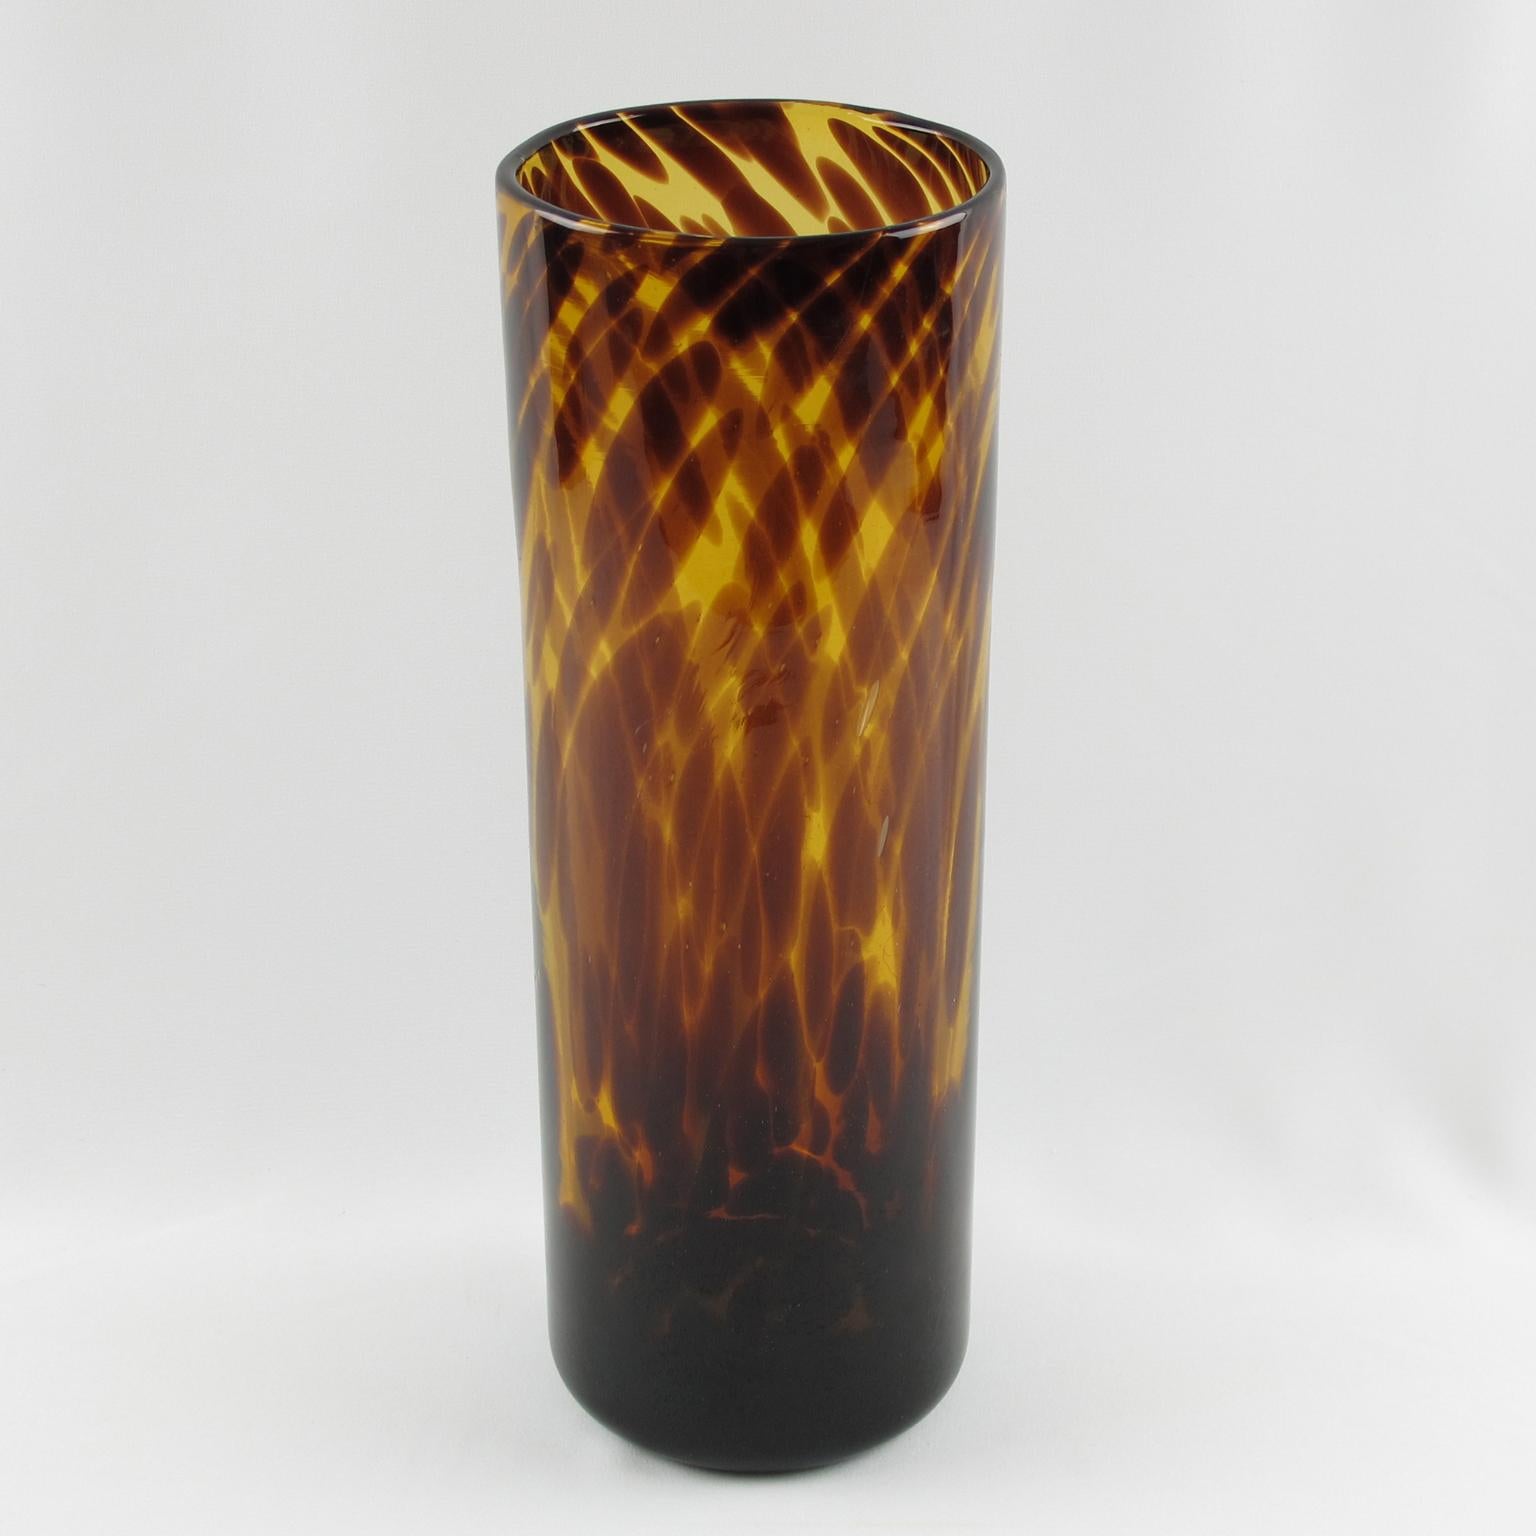 Extra tall modernist tumbler glass vase manufactured by Empoli, Italy for the Christian Dior Home Collection. Mouth-blown glass with exclusive tortoiseshell (tortoise) flowing colored pattern.
Measurements: 4.93 in. diameter (12.5 cm) x 13.75 in.